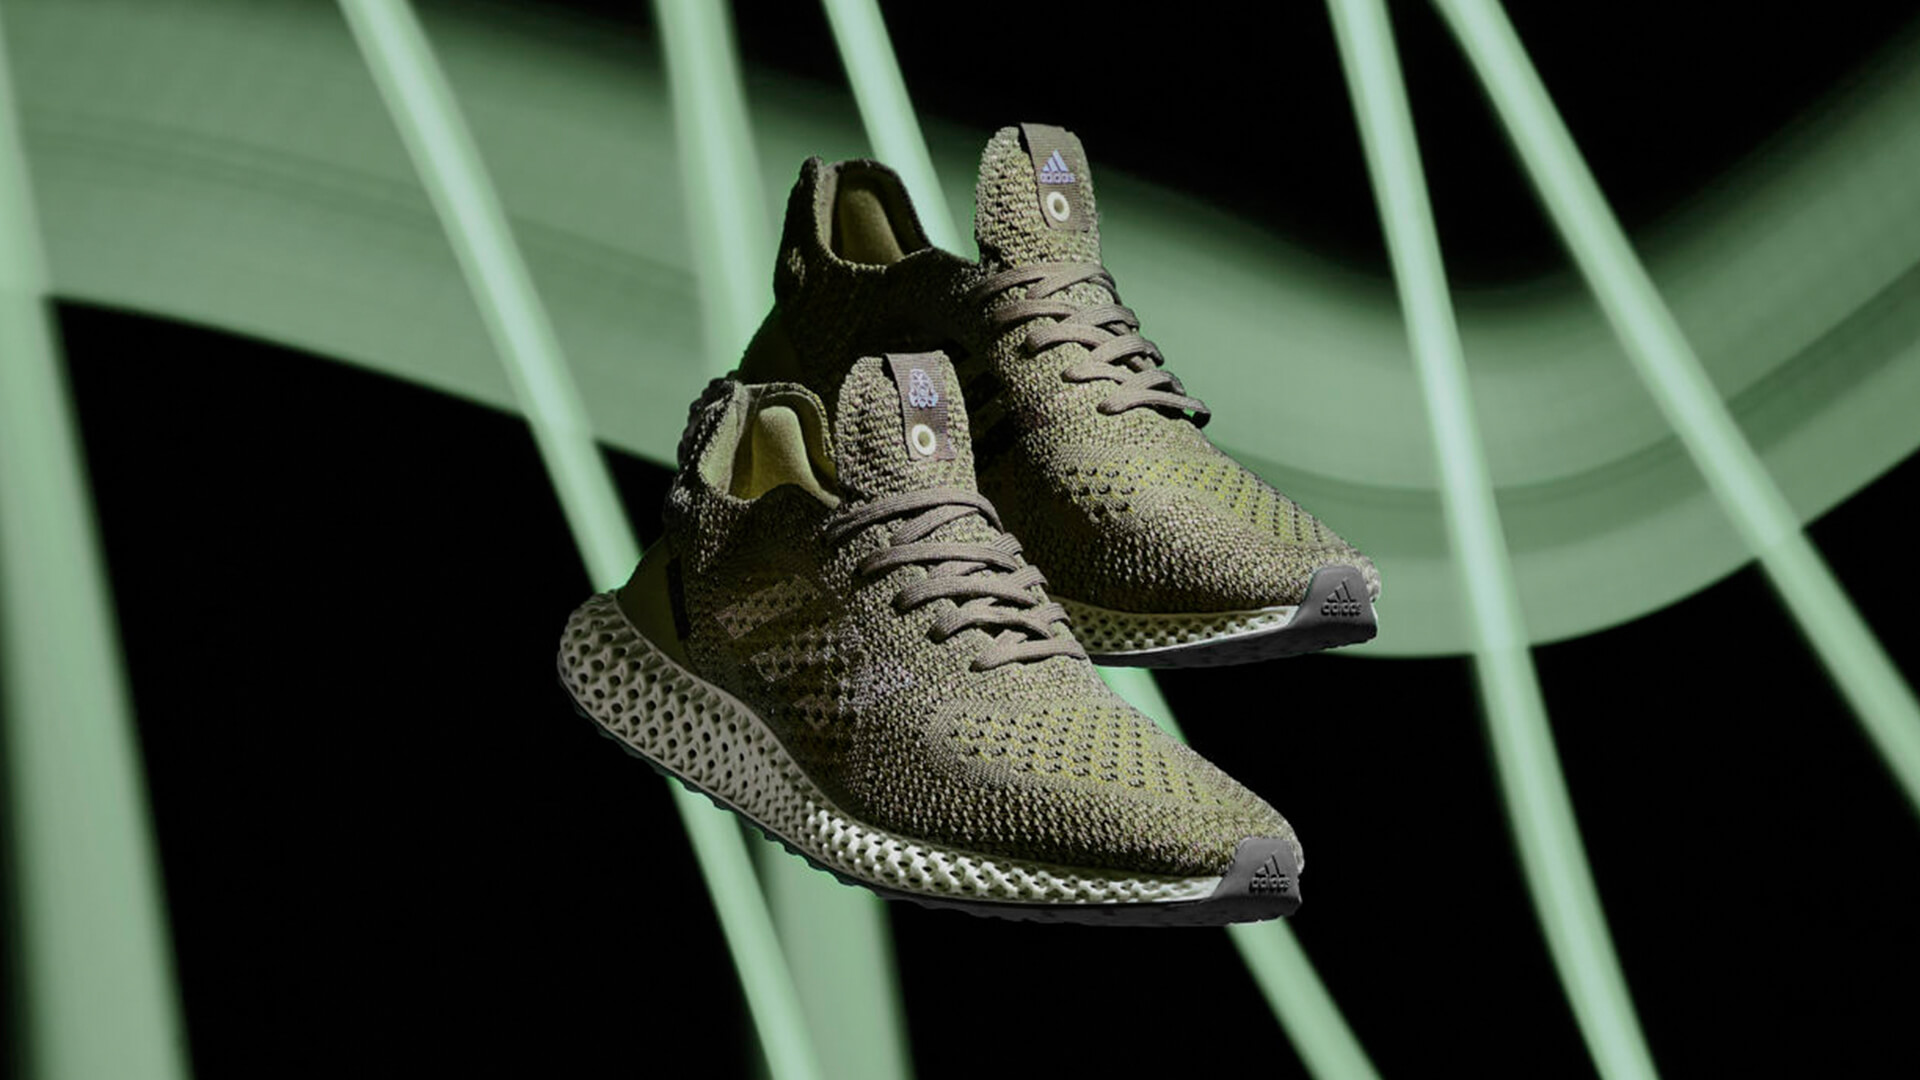 Latest adidas Futurecraft 4D Trainer Releases & Next Drops | The Sole ...